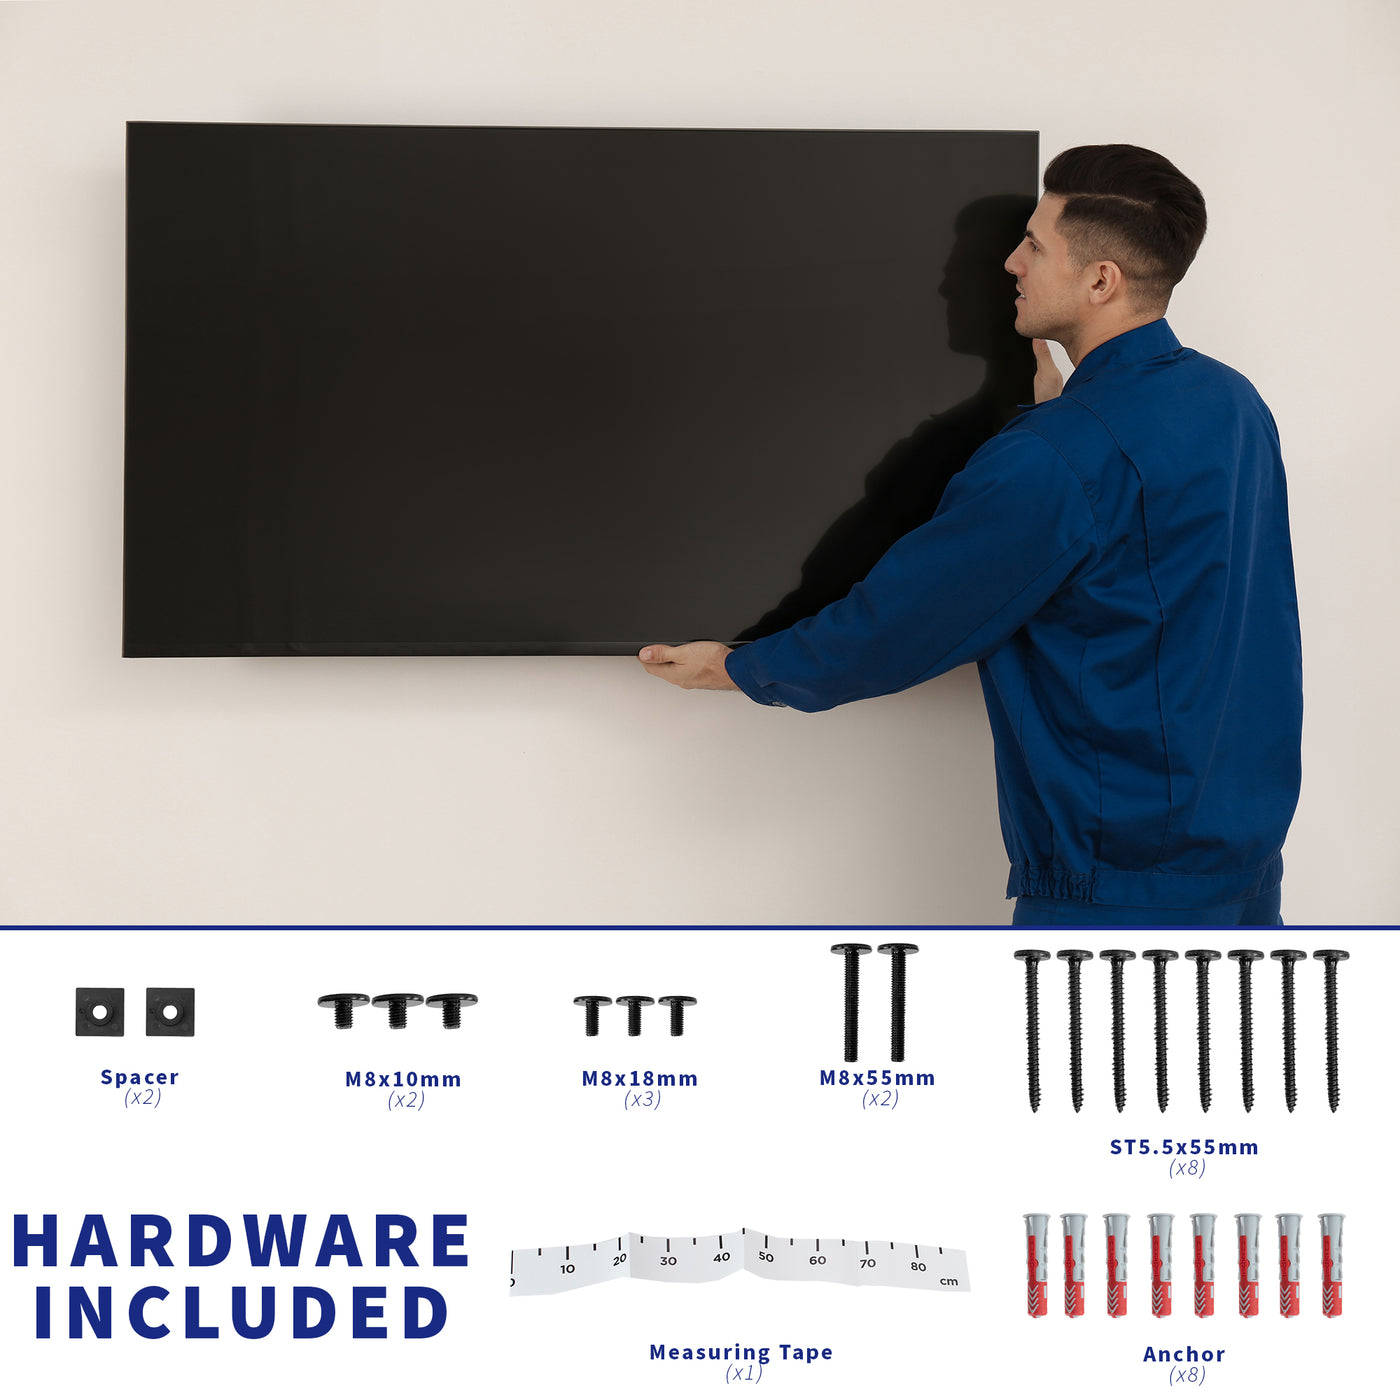  All necessary hardware is included to get your TV mounted in no time.